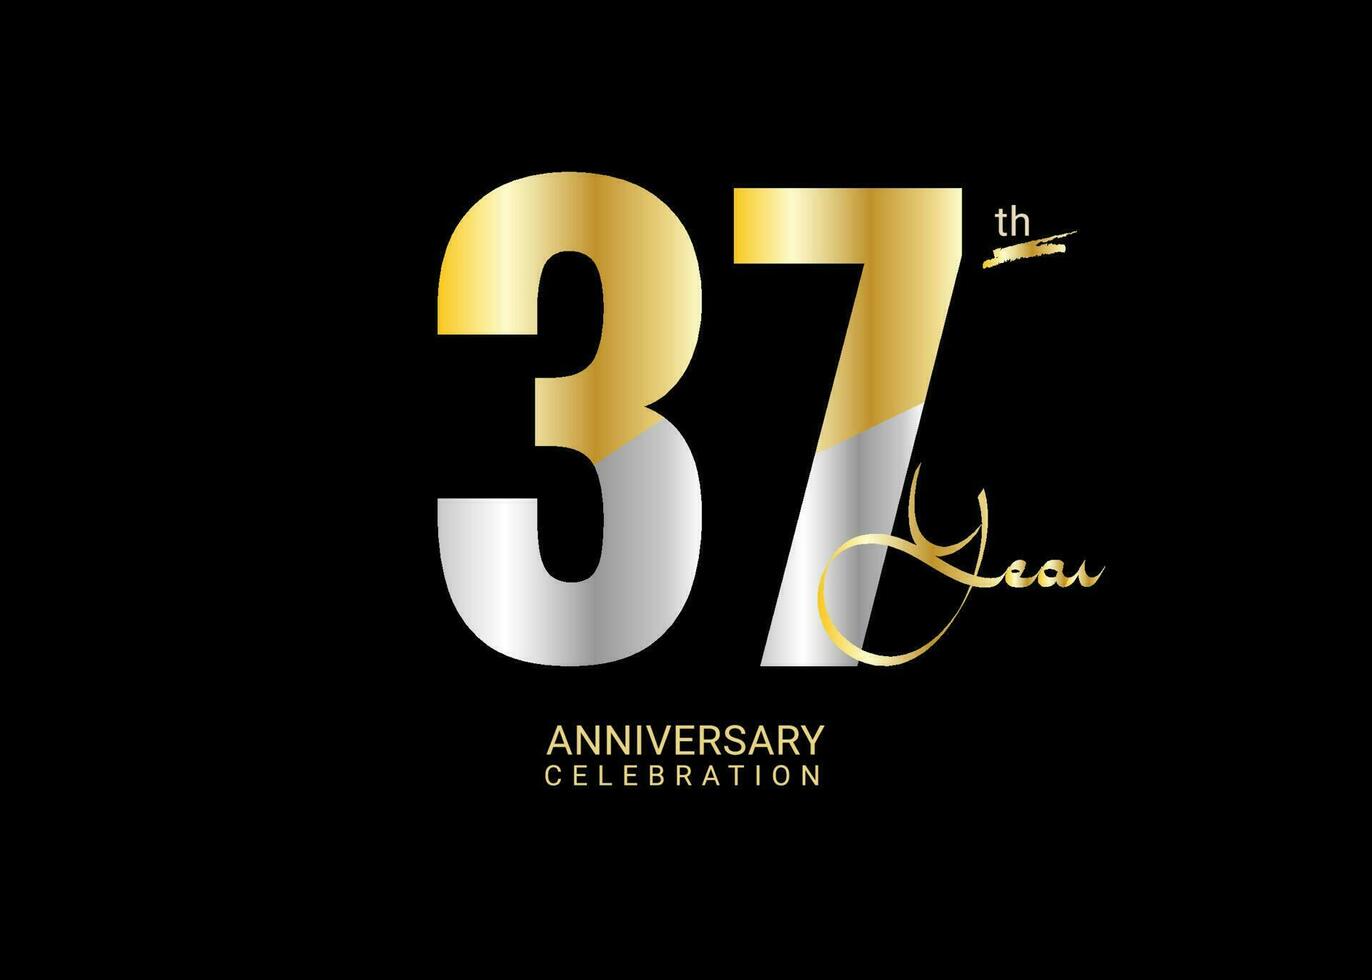 37 Years Anniversary Celebration gold and silver Vector Template, 37 number logo design, 37th Birthday Logo,  logotype Anniversary, Vector Anniversary For Celebration, poster, Invitation Card